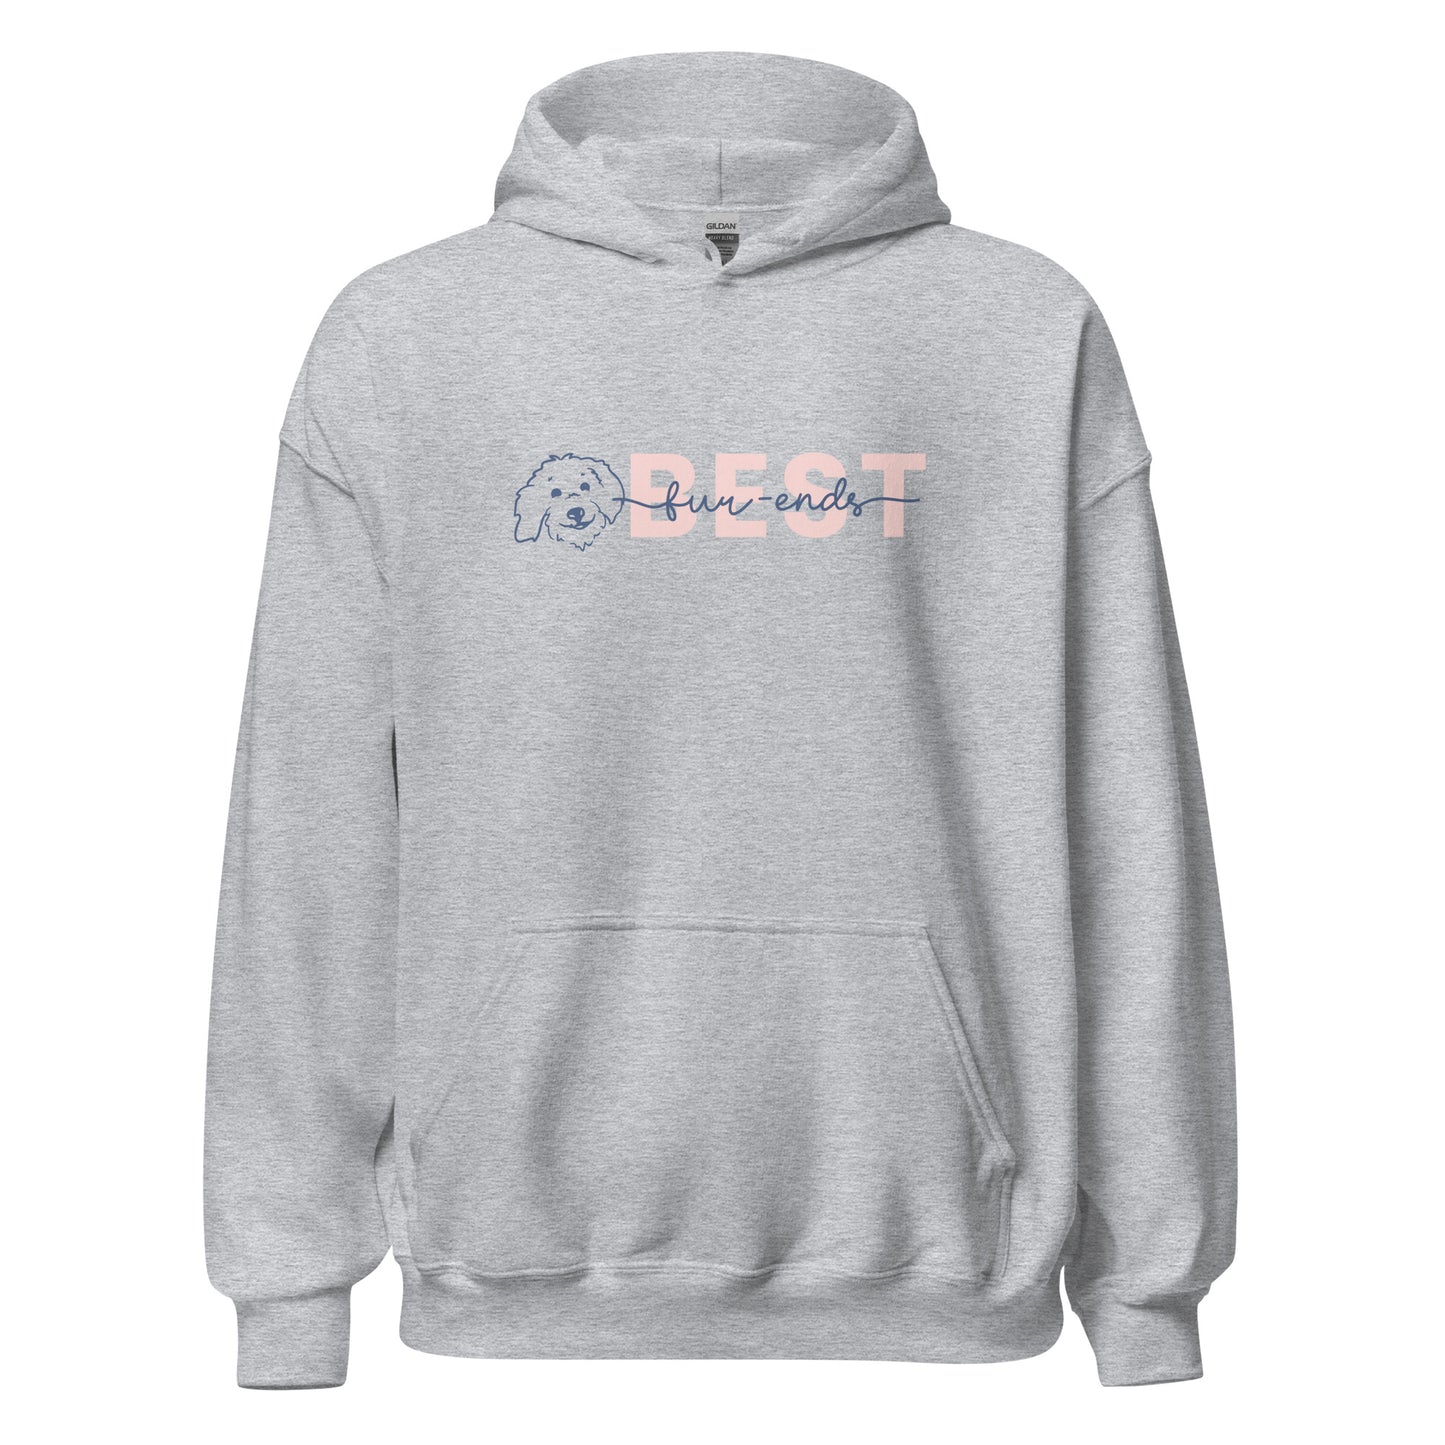 Goldendoodle hoodie sweatshirt with Goldendoodle face and words "Best fur-Ends" in Sport gray color